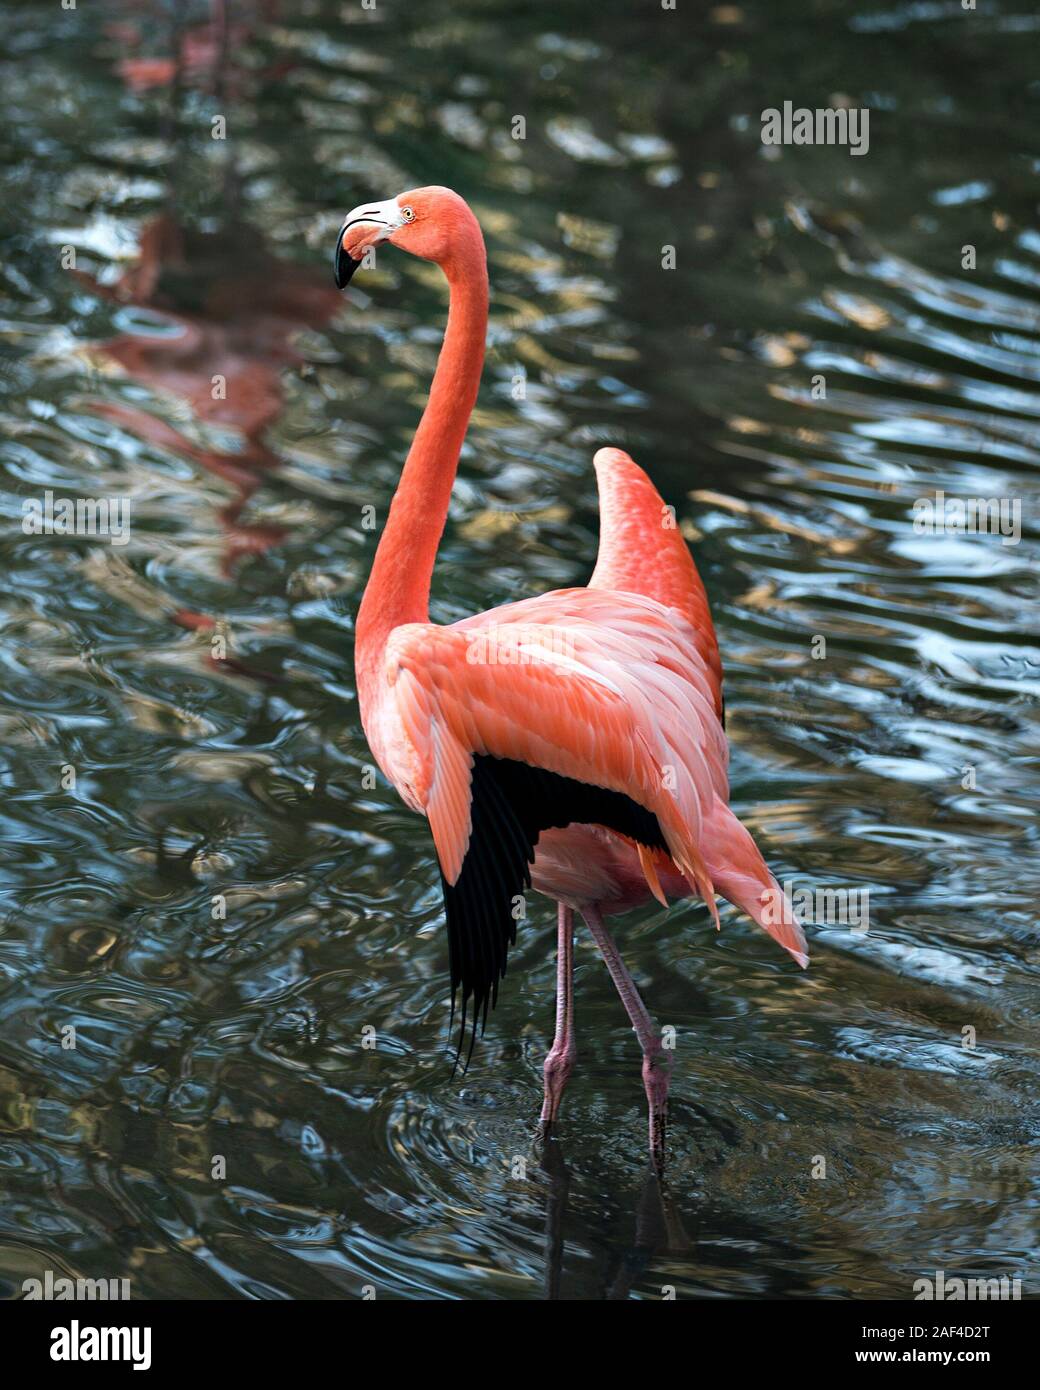 Flamingo bird close-up profile view in the water displaying its spread wings, beautiful plumage, head, long neck, beak, eye in its surrounding and env Stock Photo